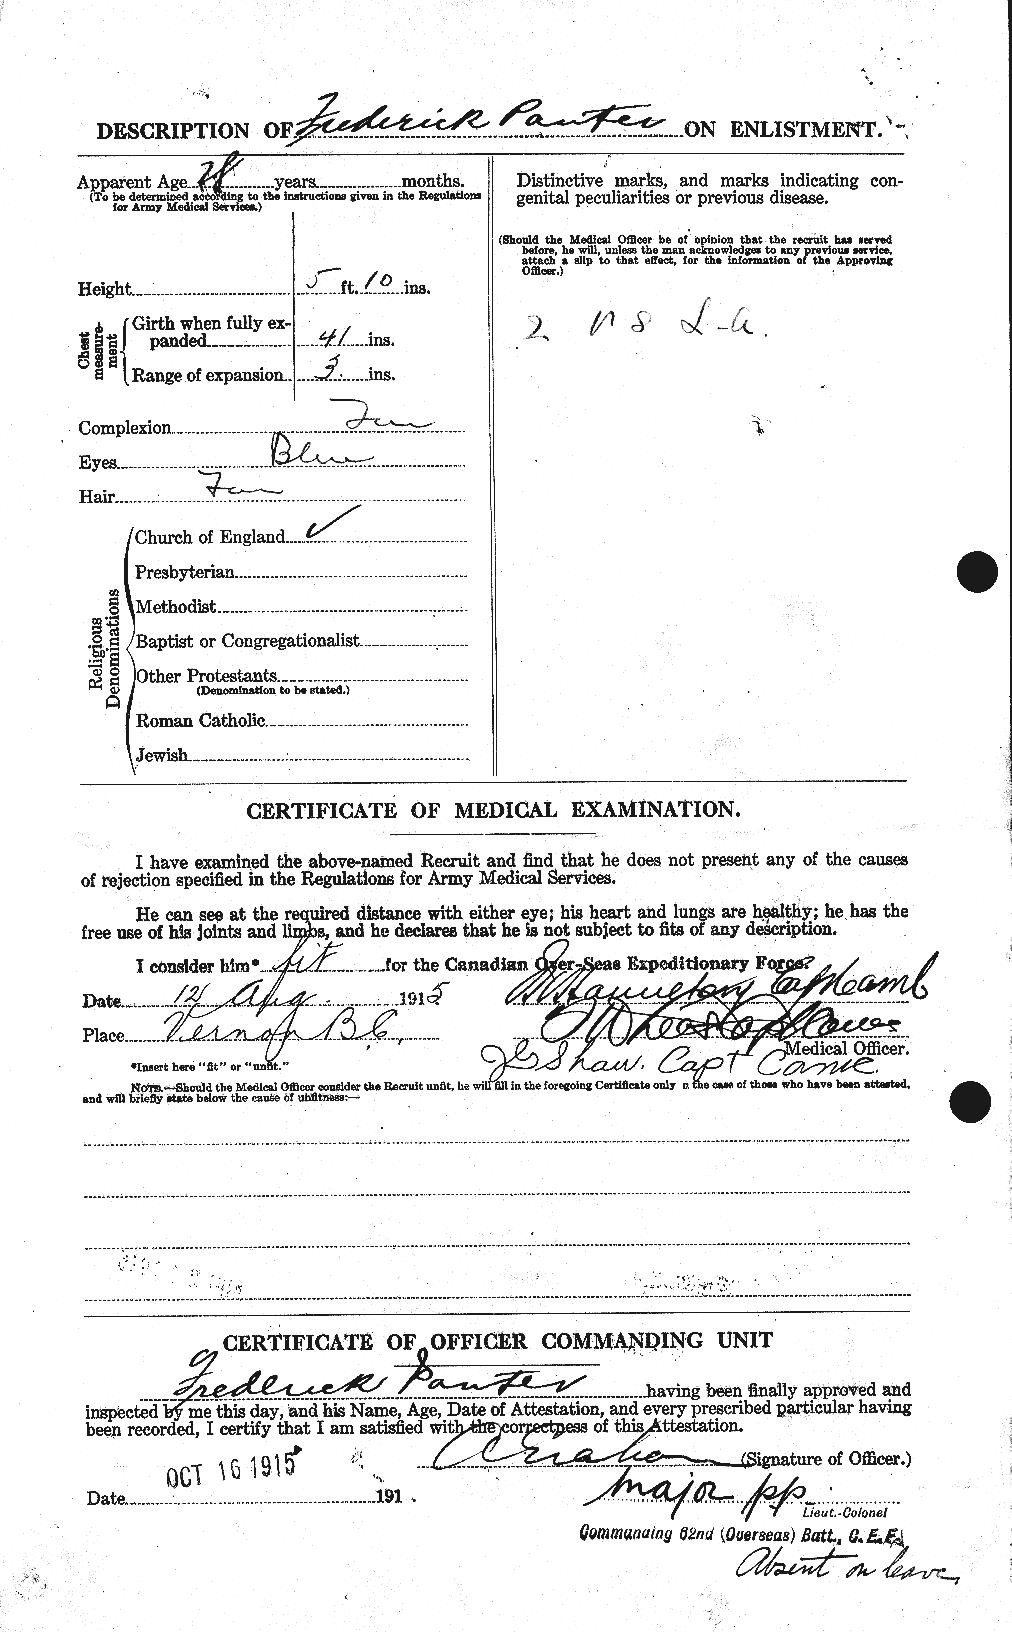 Personnel Records of the First World War - CEF 563428b